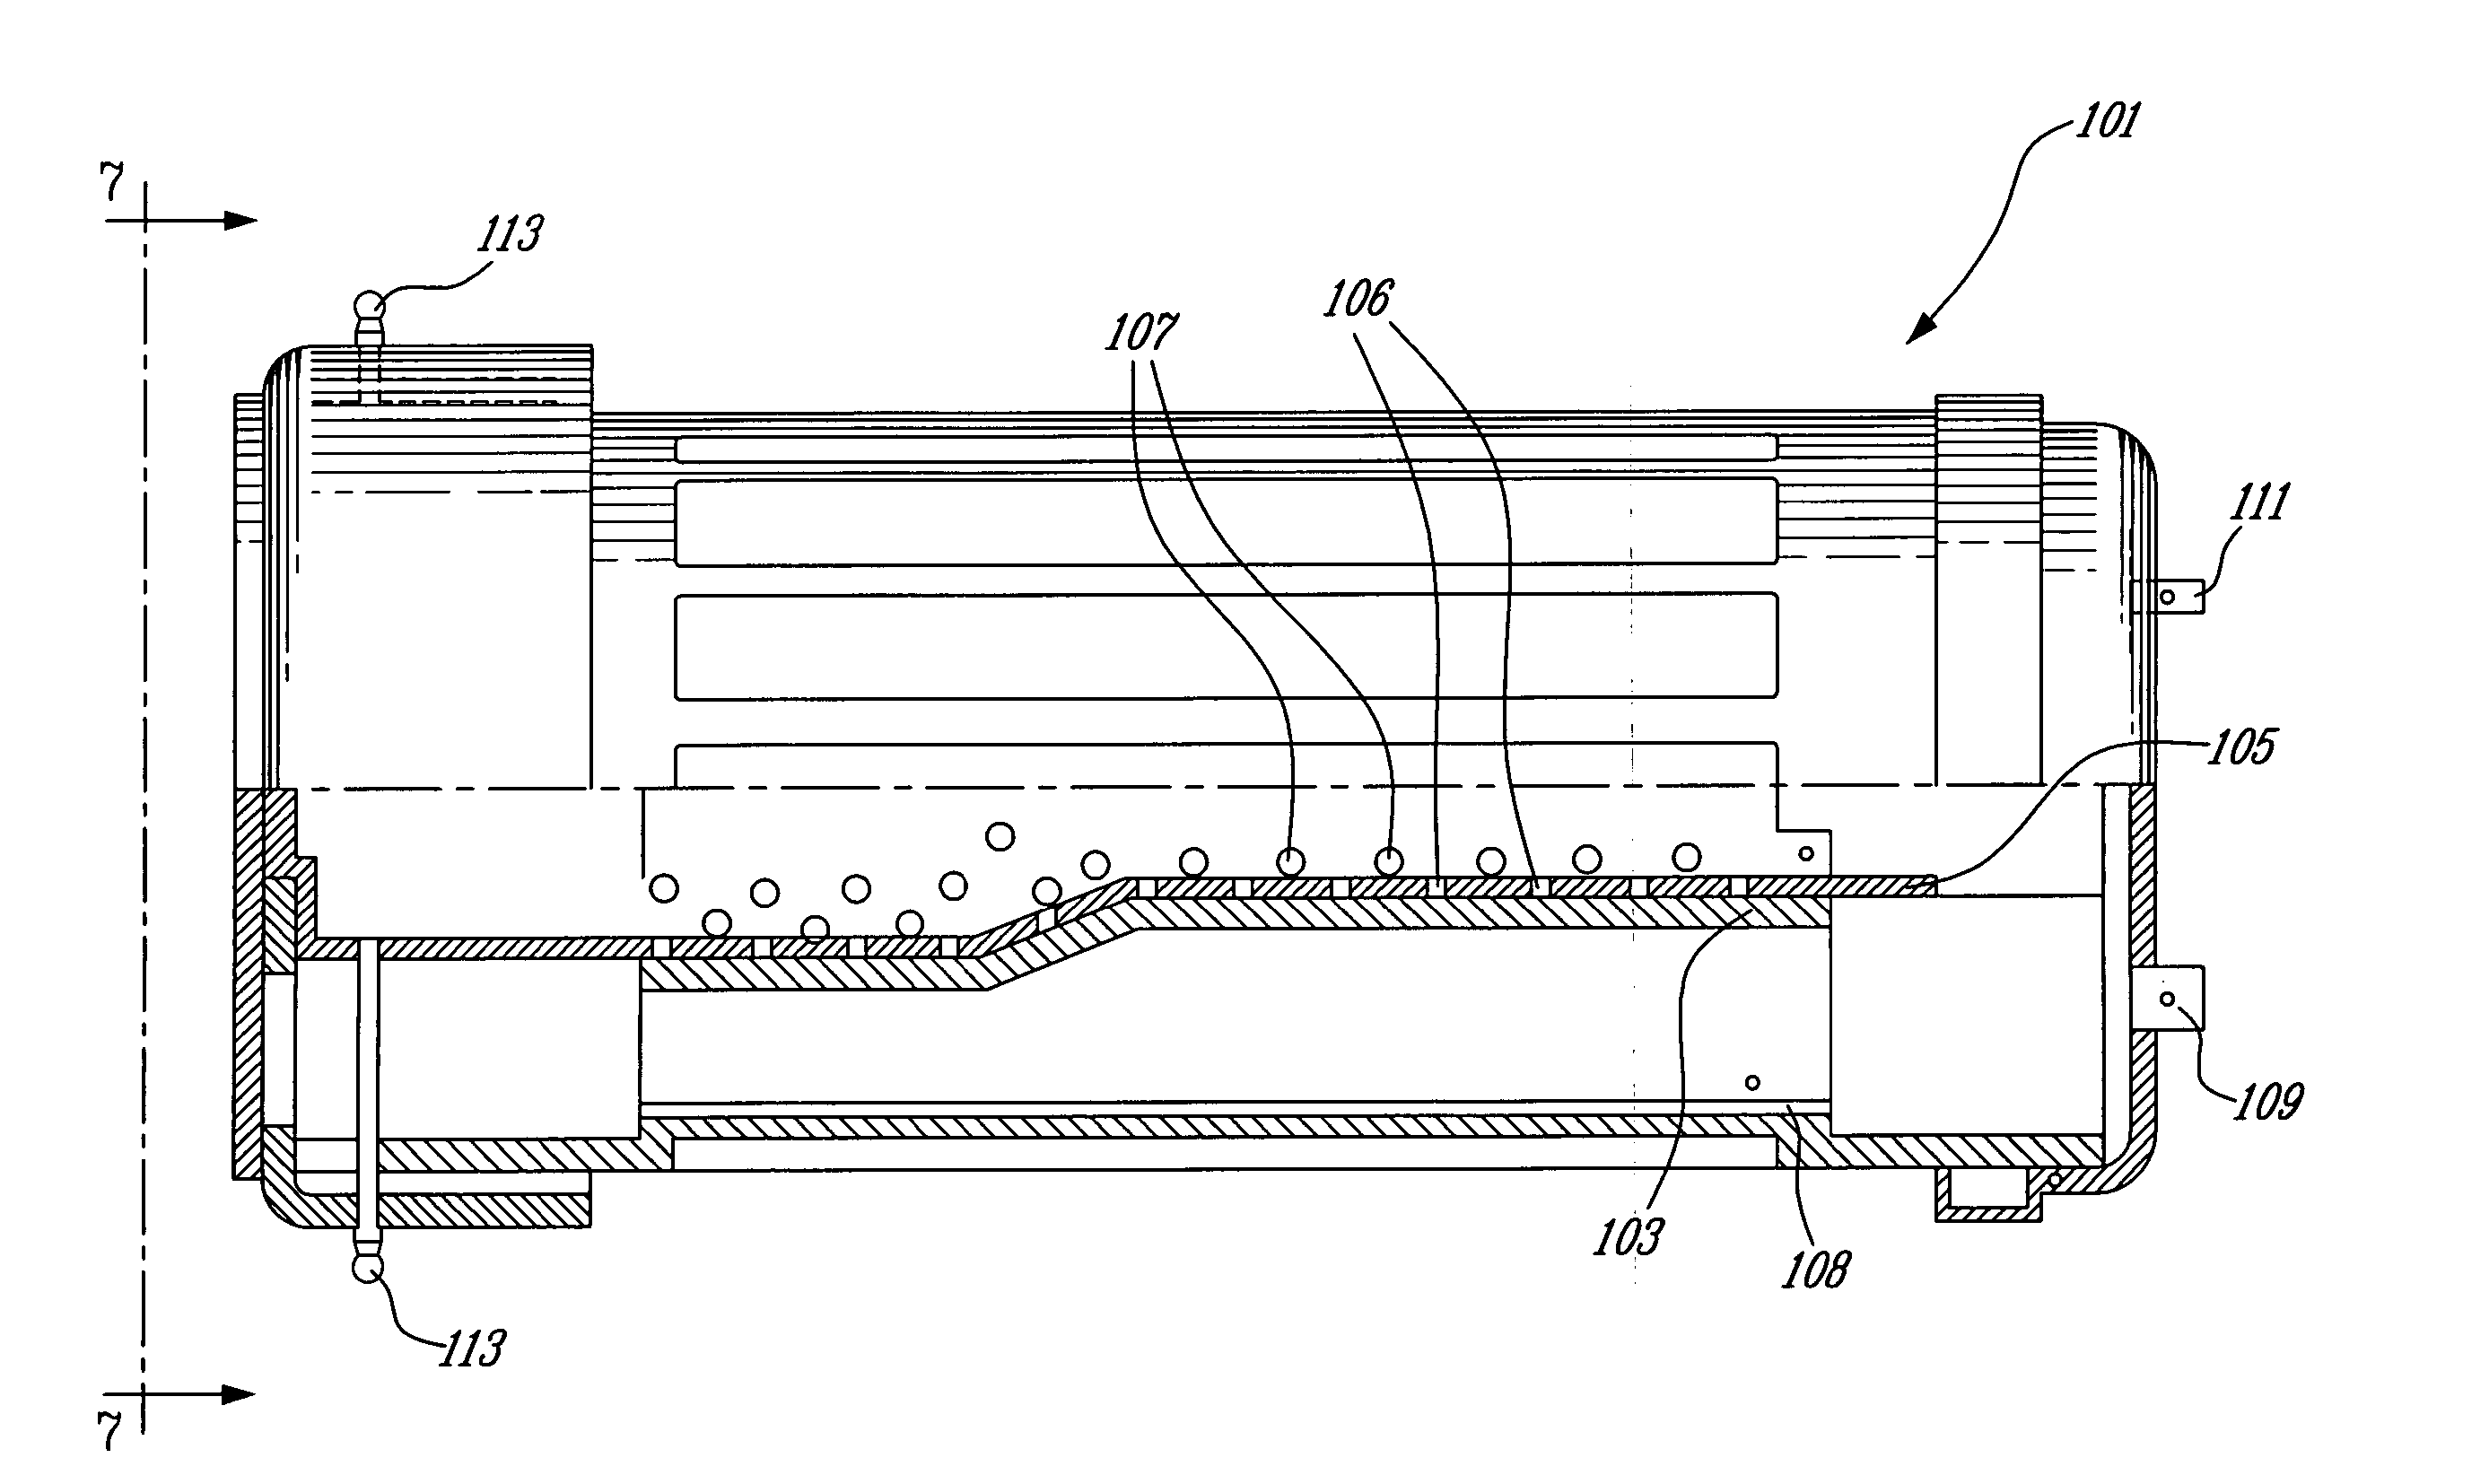 Process and apparatus for treating sludge by the combined action of electro-osmosis and pressure